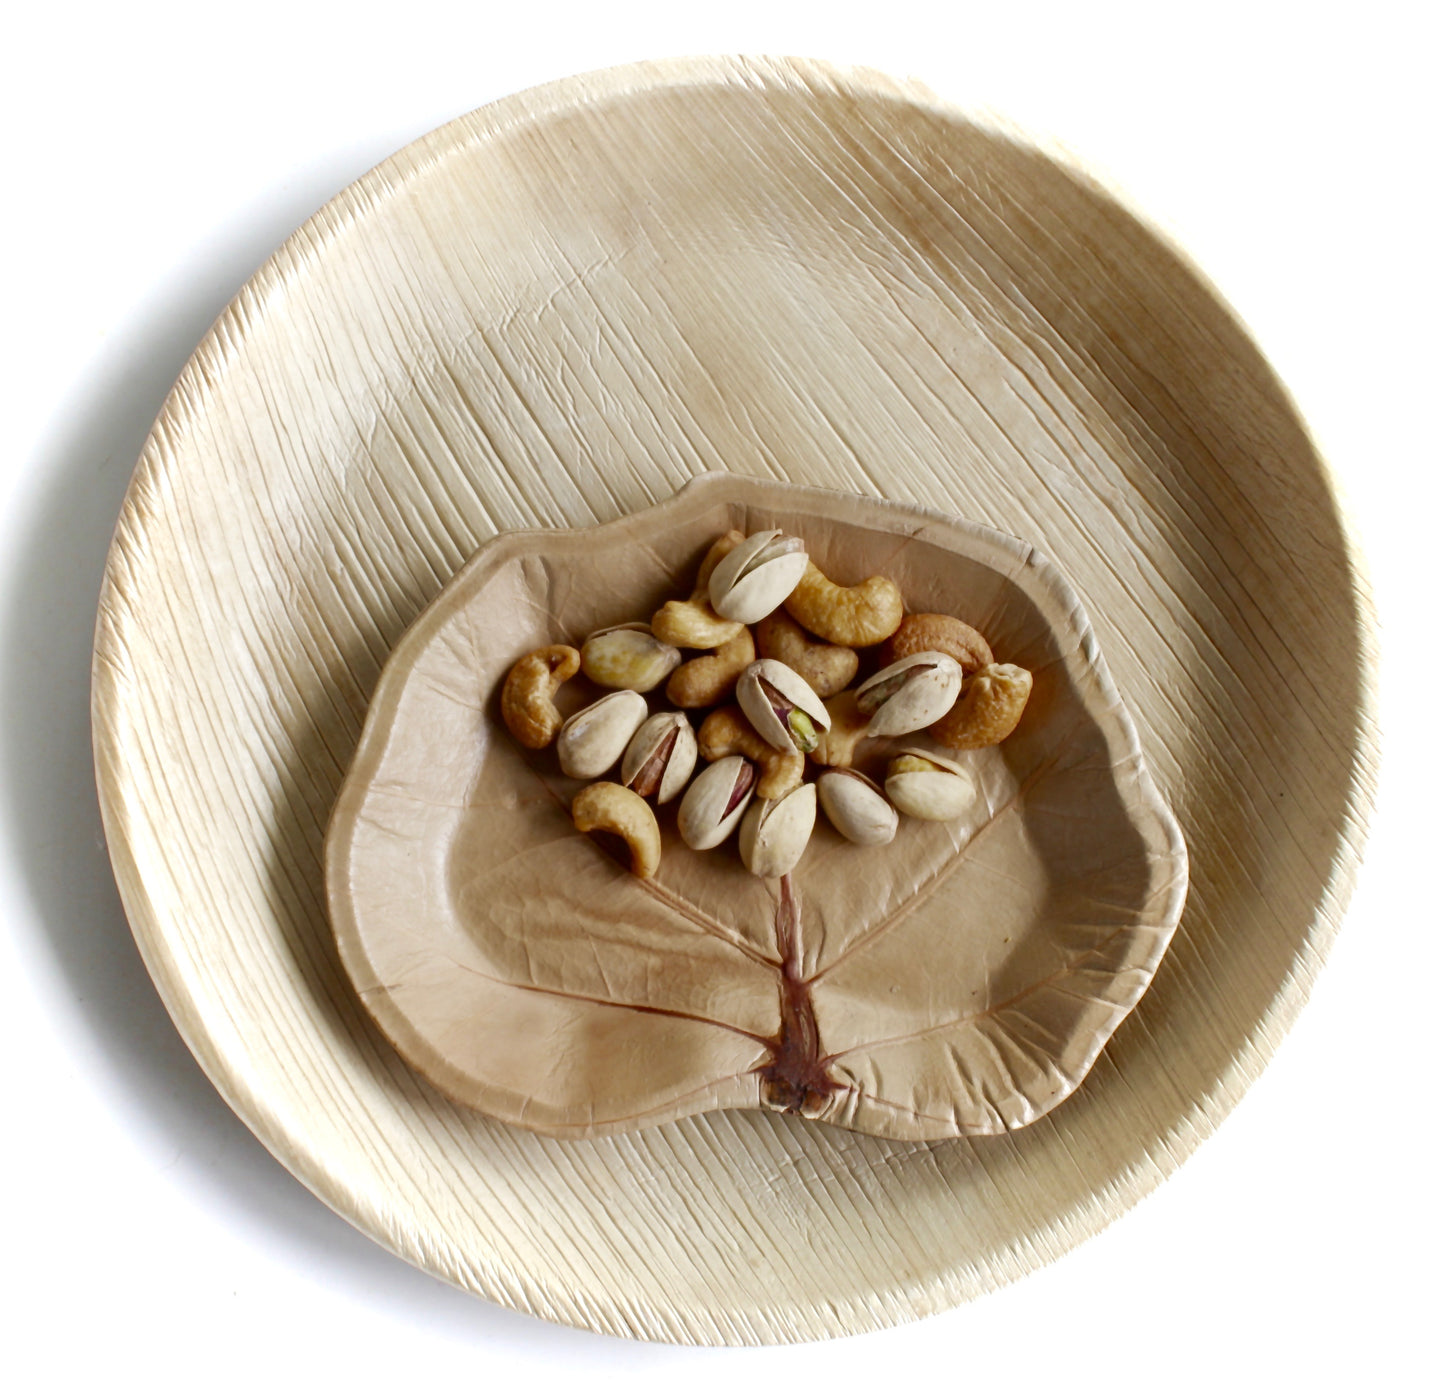 Bamboo type Palm Leaf plate  20 pic Round 10" - 20 pic Sea Grape Natural Dessert Plate 7" - 60 pic Utensils -Biodegradable